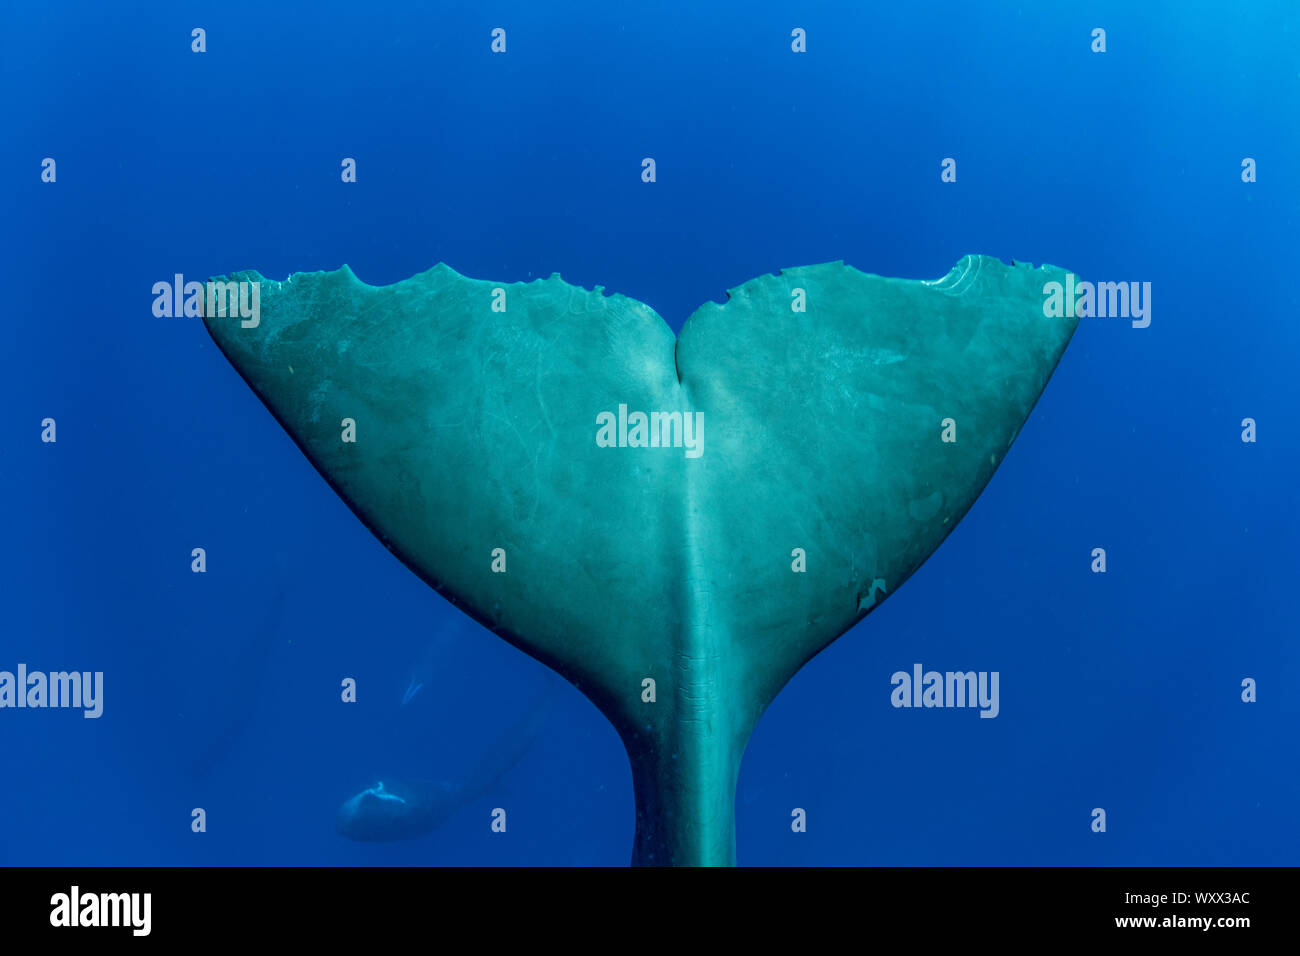 Tail of sperm whale, (Physeter macrocephalus). Vulnerable (IUCN). The sperm whale is the largest of the toothed whales. Sperm whales are known to dive Stock Photo